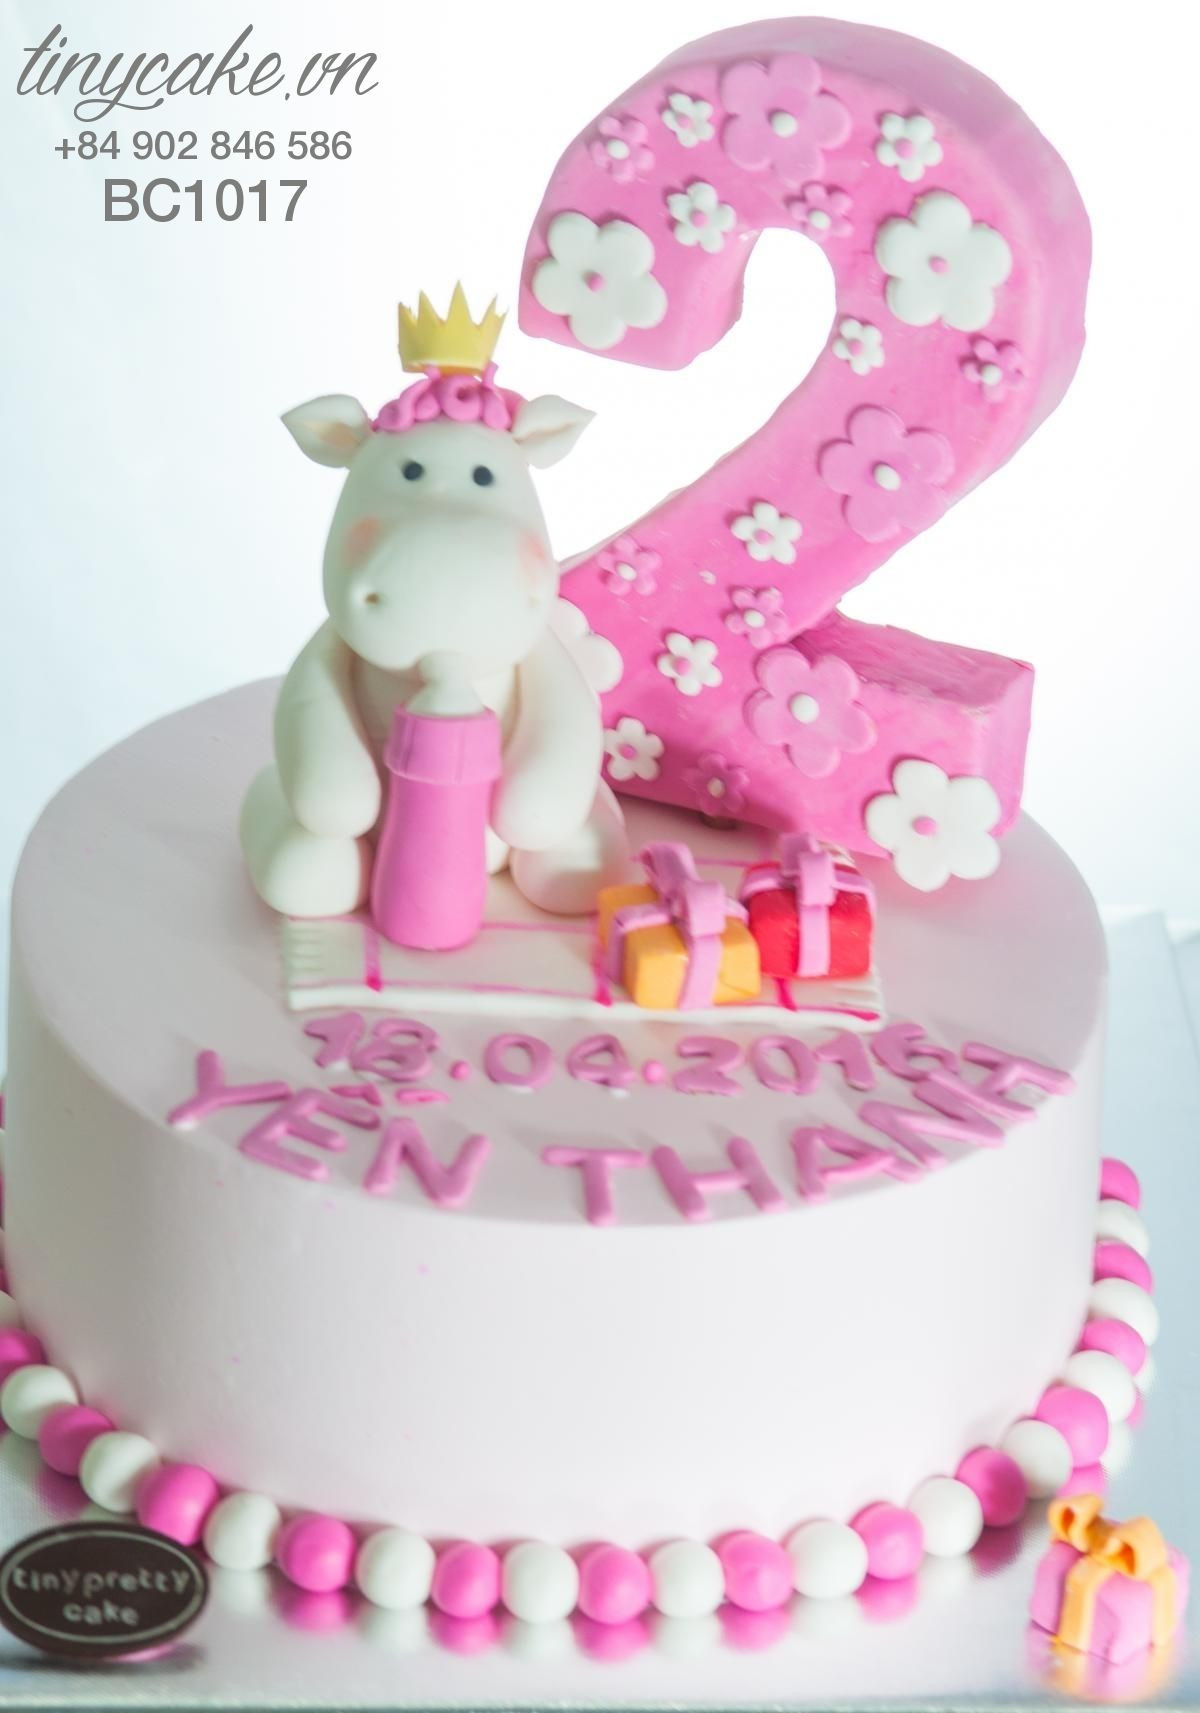 2 Year Old Birthday Cake
 Birthday cake with little horse for baby girl 2 years old